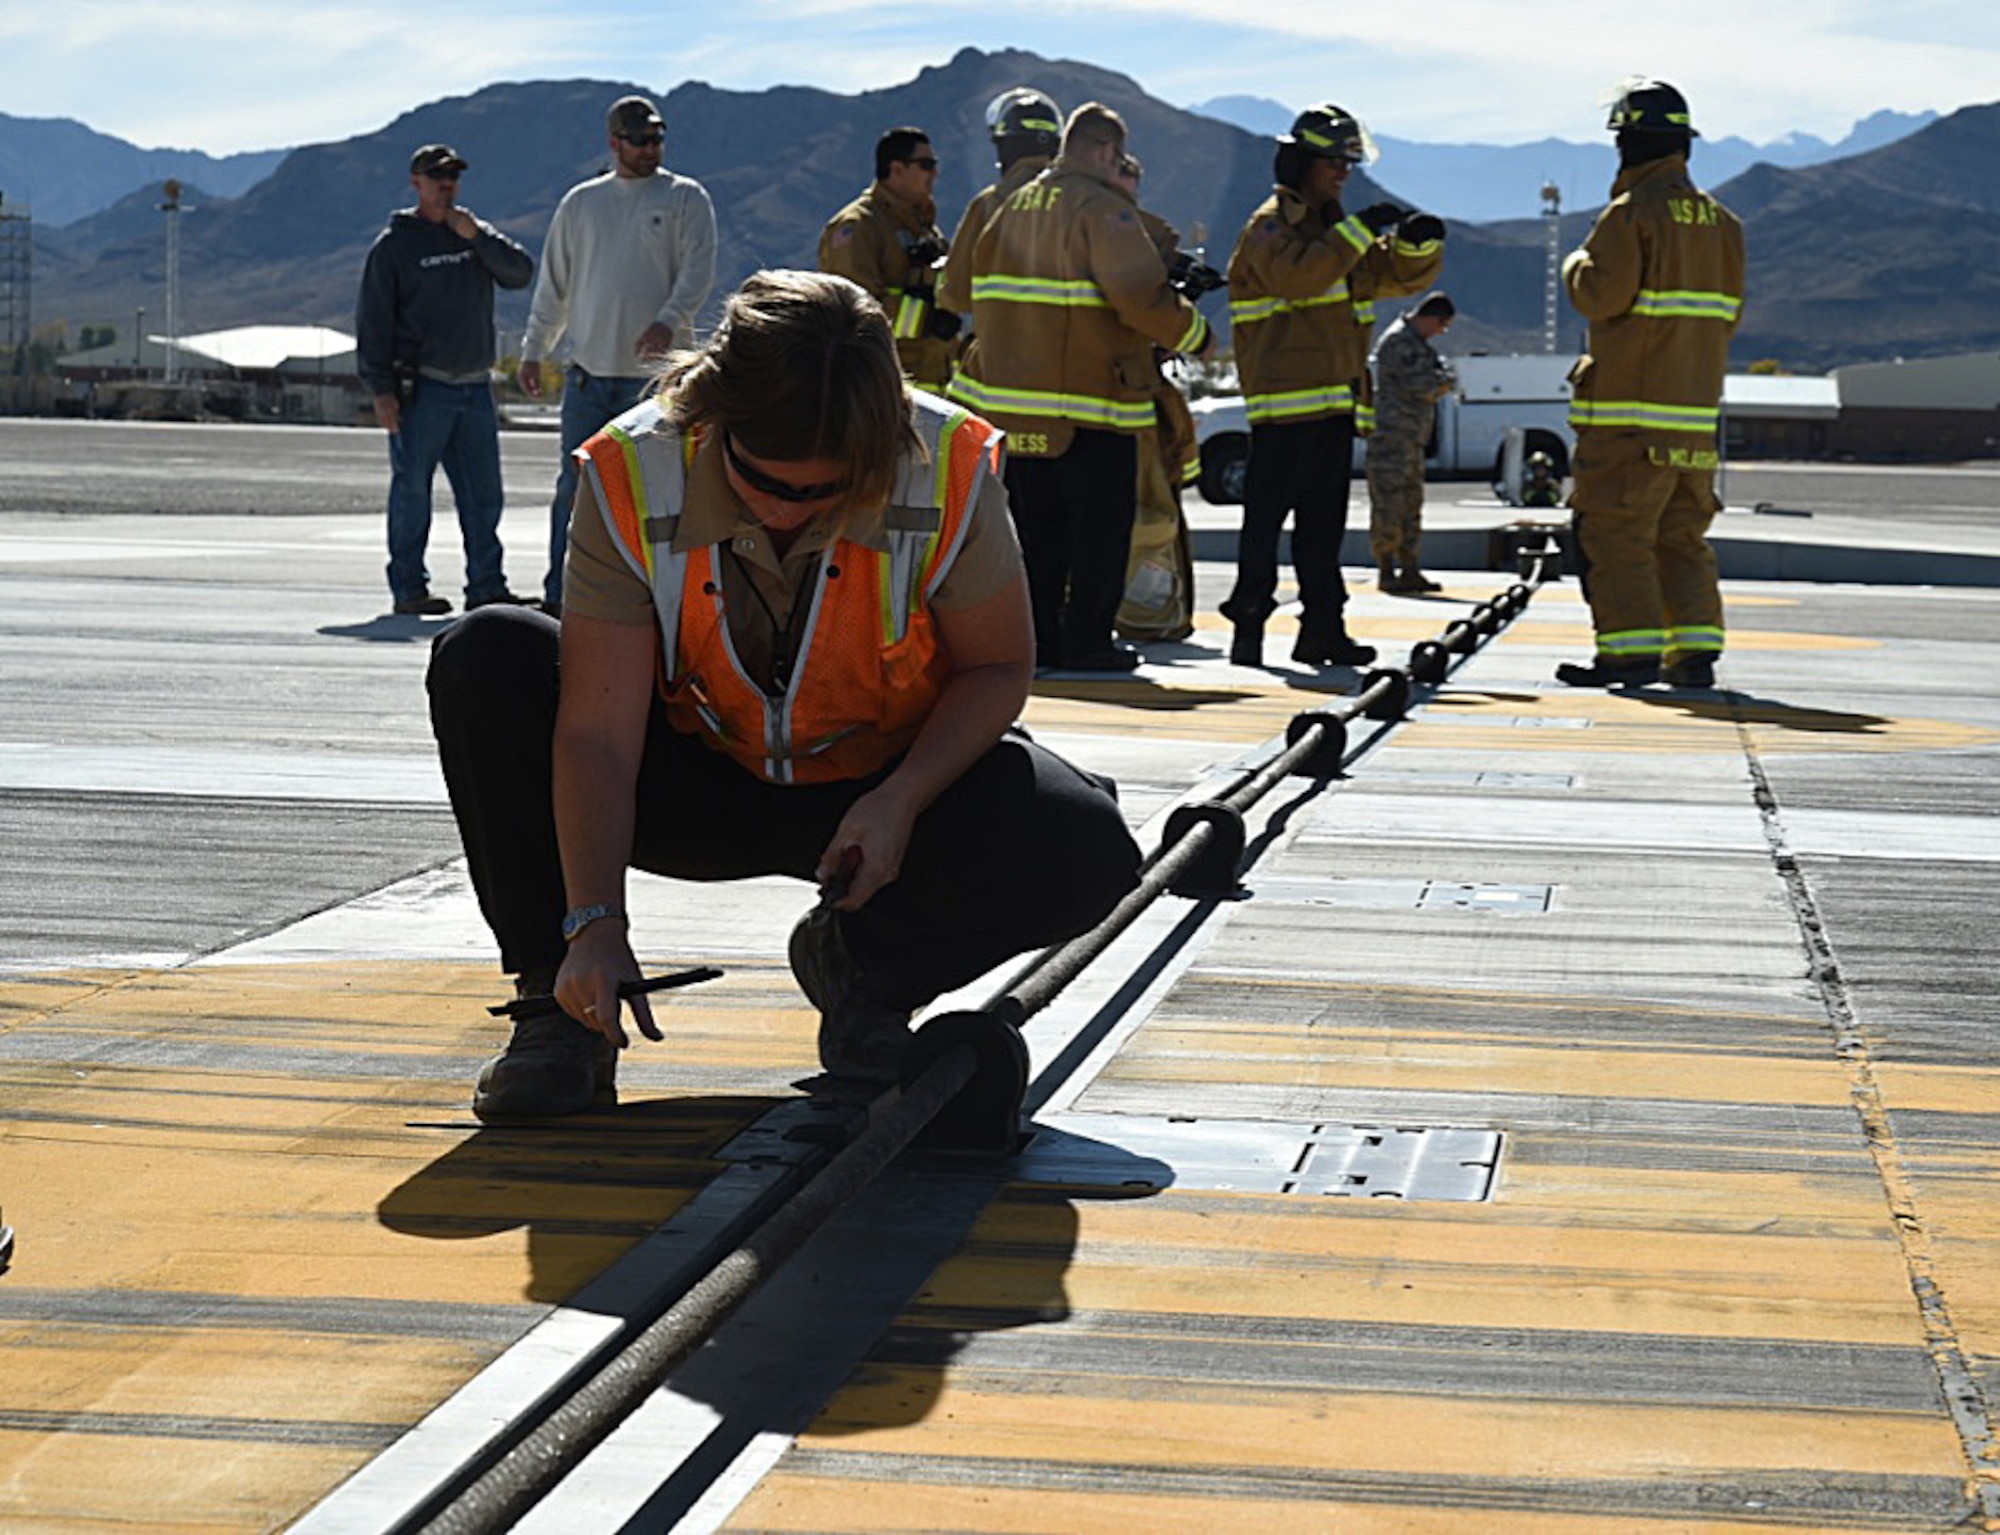 A powered support systems technician with the Nellis Testing and Training Range’s Support Squadron examines the arresting system Nov. 15, 2016, at Creech Air Force Base, Nev. The purpose of an active aircraft arresting system is to assist in decelerating aircraft during emergency situations.  (U.S. Air Force photo by Airman 1st Class James Thompson)